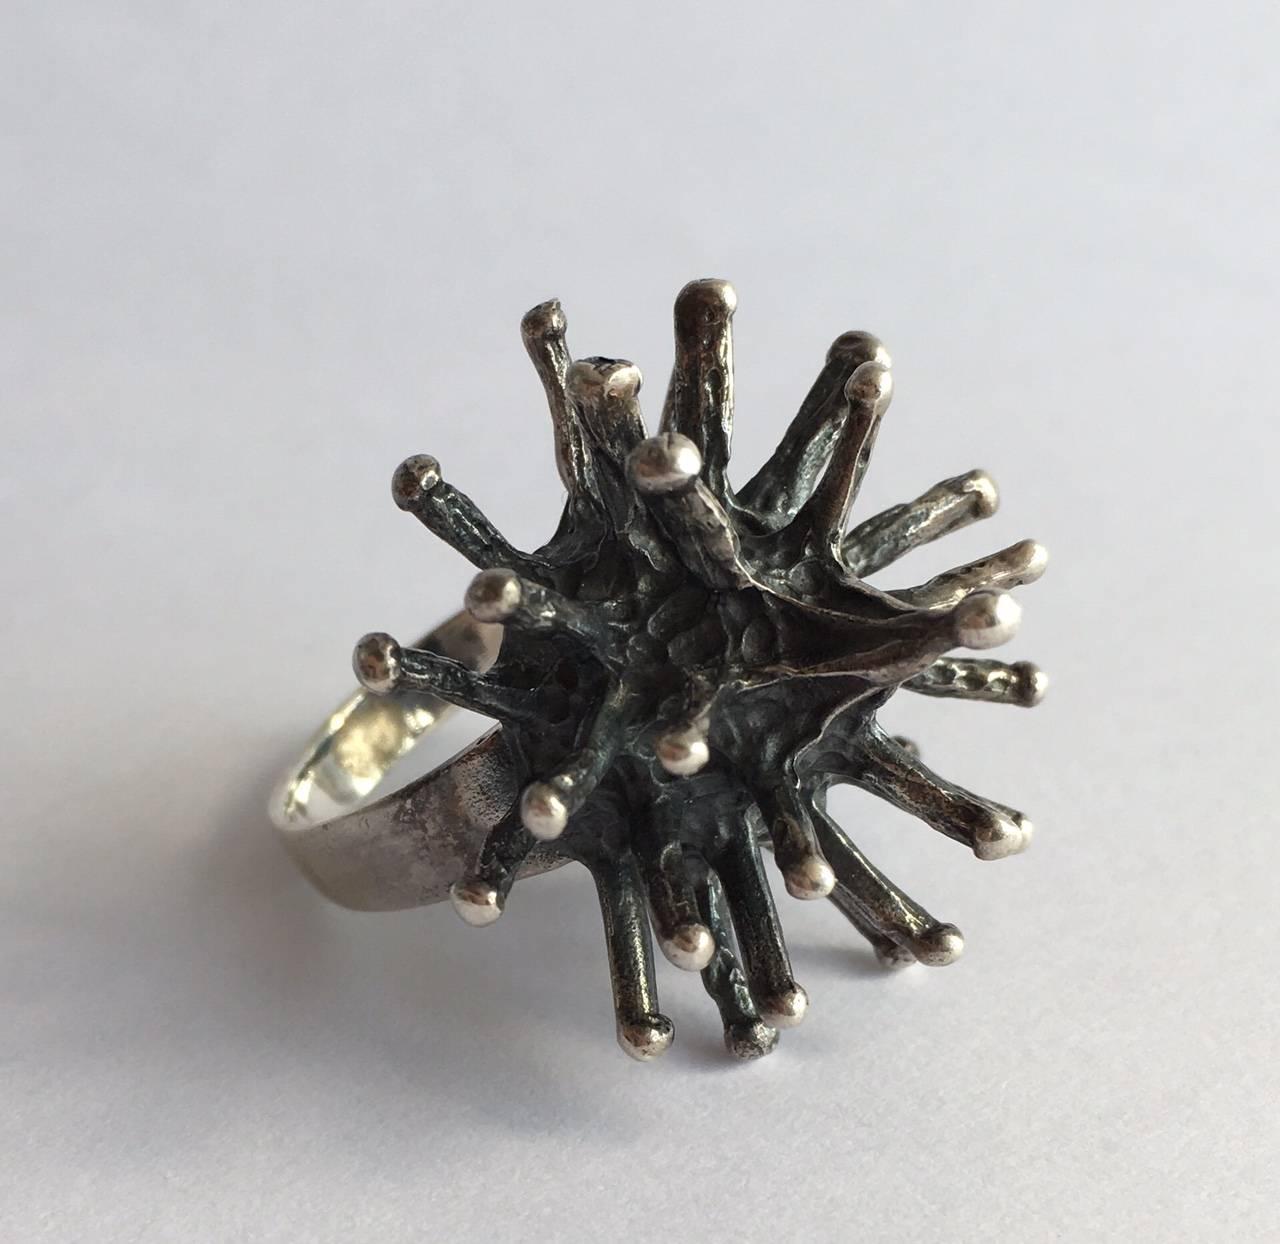 Vintage Jewelry Silver Flower Rings Abstract Starburst Sculpture Architectural 1